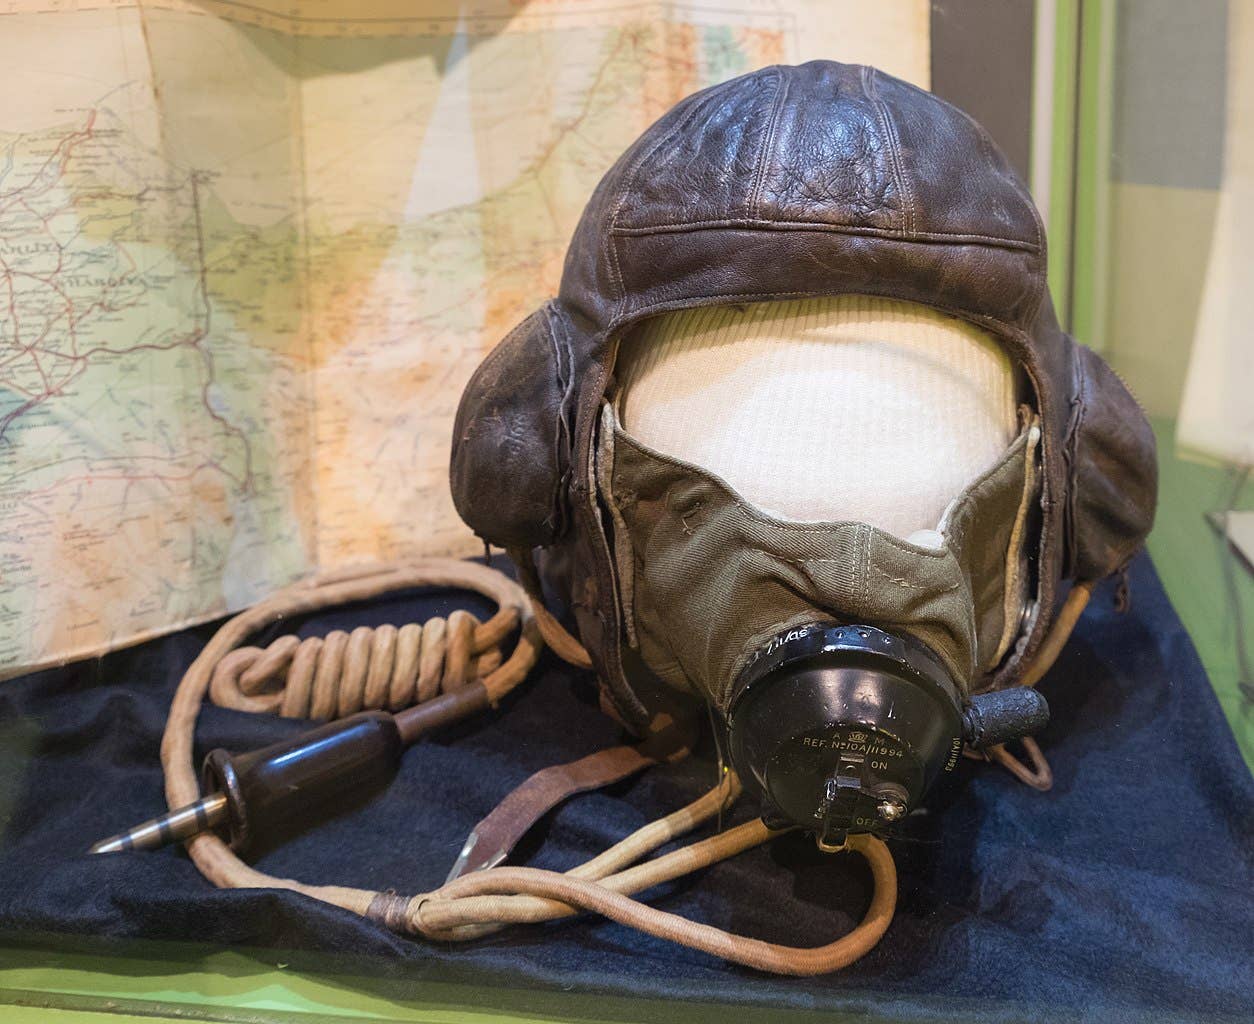 Roald Dahl's leather flying helmet which is equipped with communication cables and oxygen mask. Dahl was an RAF fighter pilot in the Second World War. This item is on display in the Roald Dahl Museum and Story Centre in Great Missenden, Buckinghamshire. (Public domain)